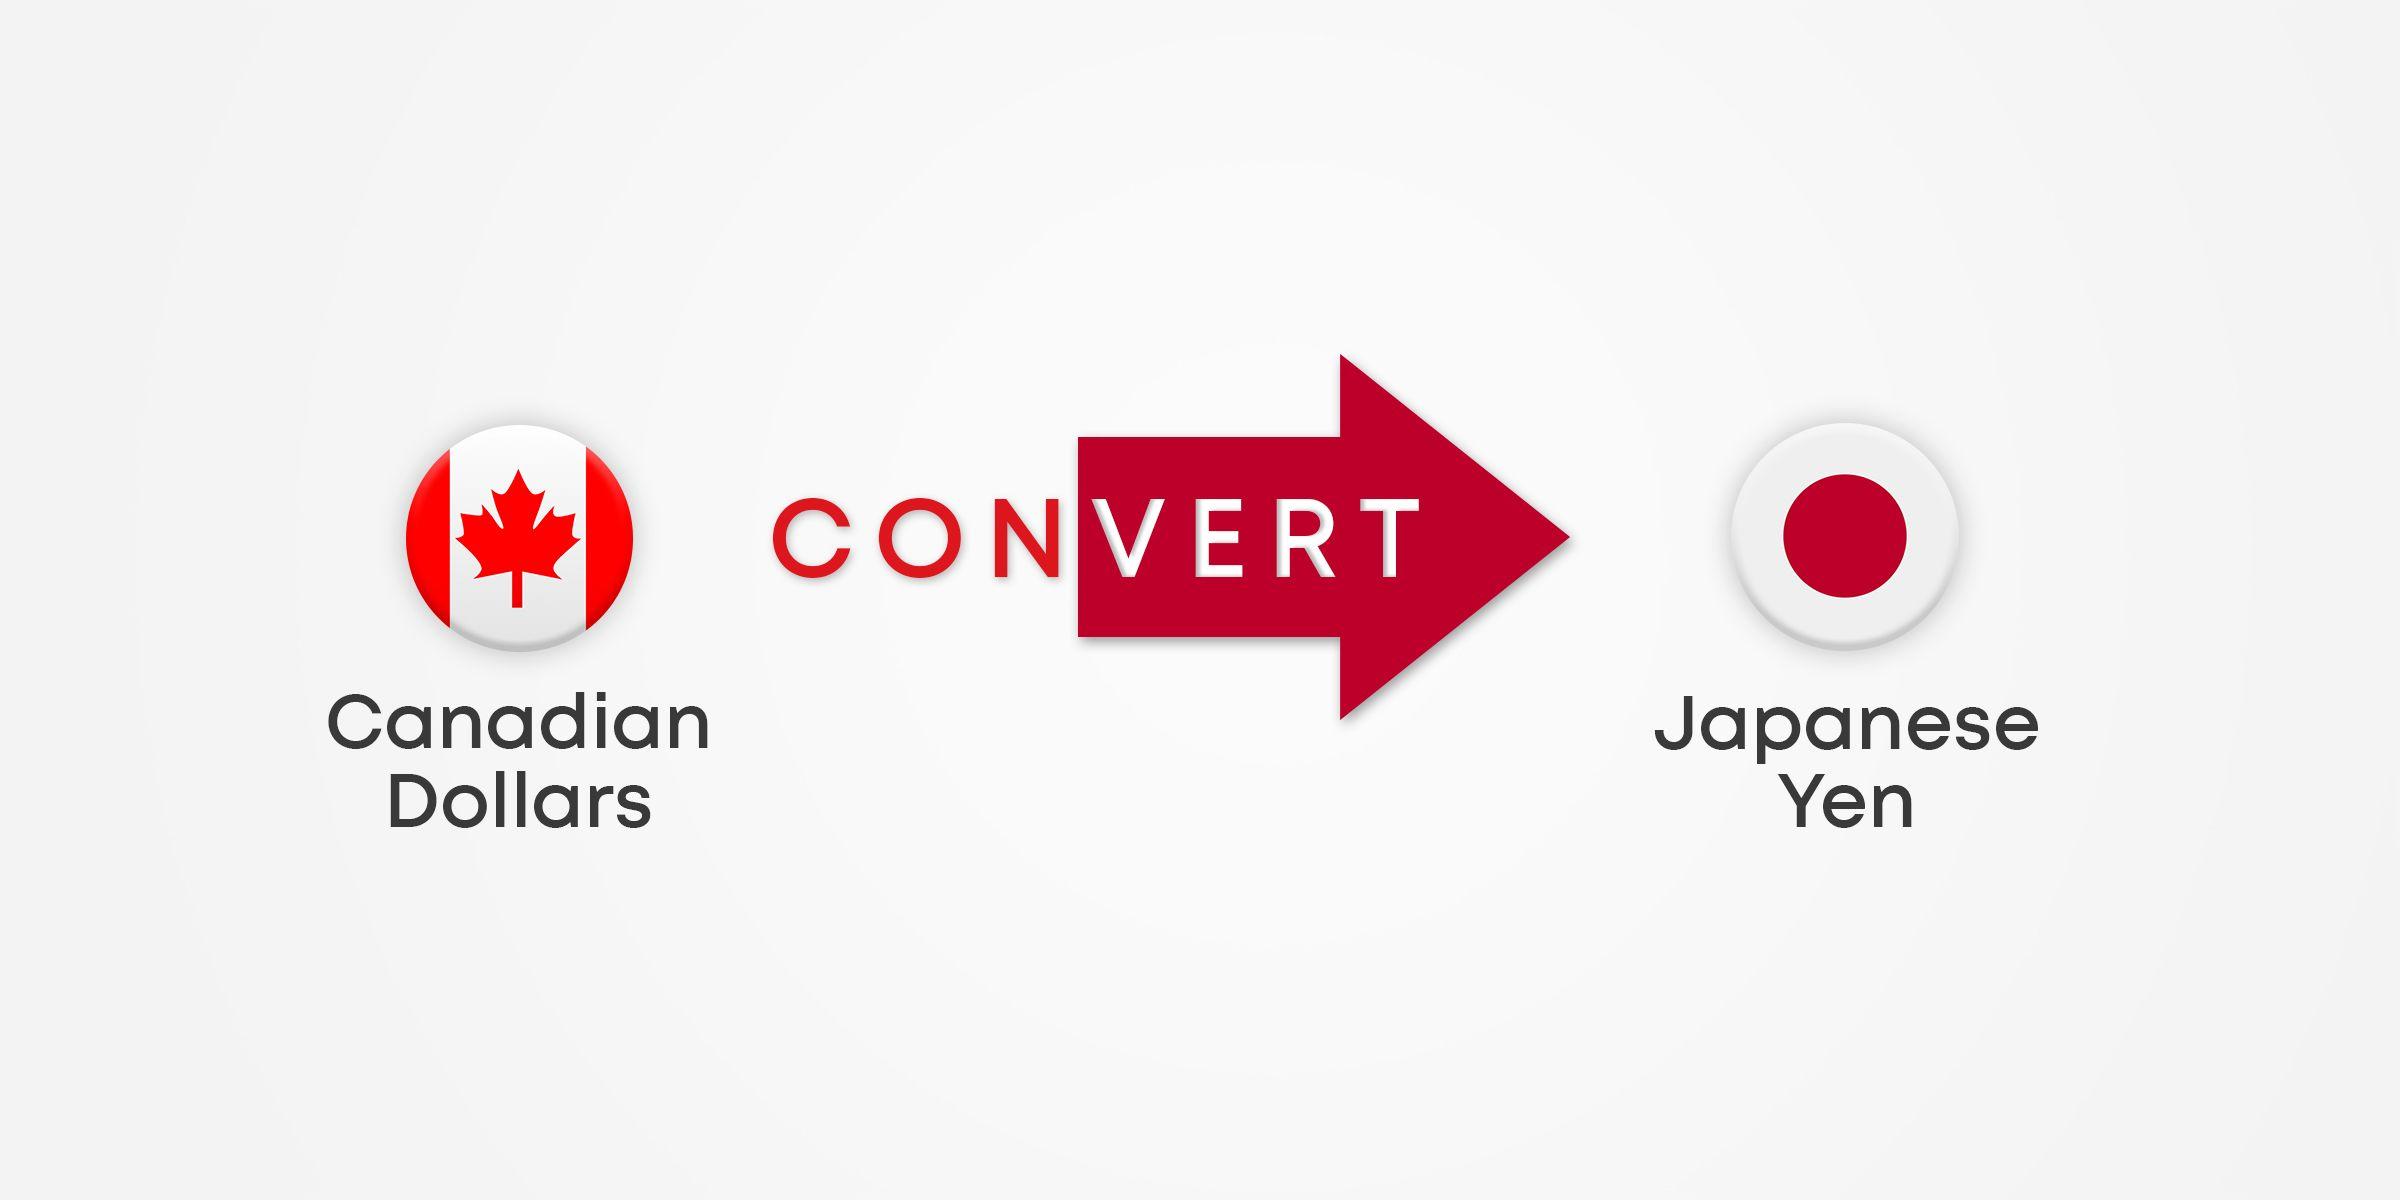 How to Convert Your Canadian Dollars to Japanese Yen?